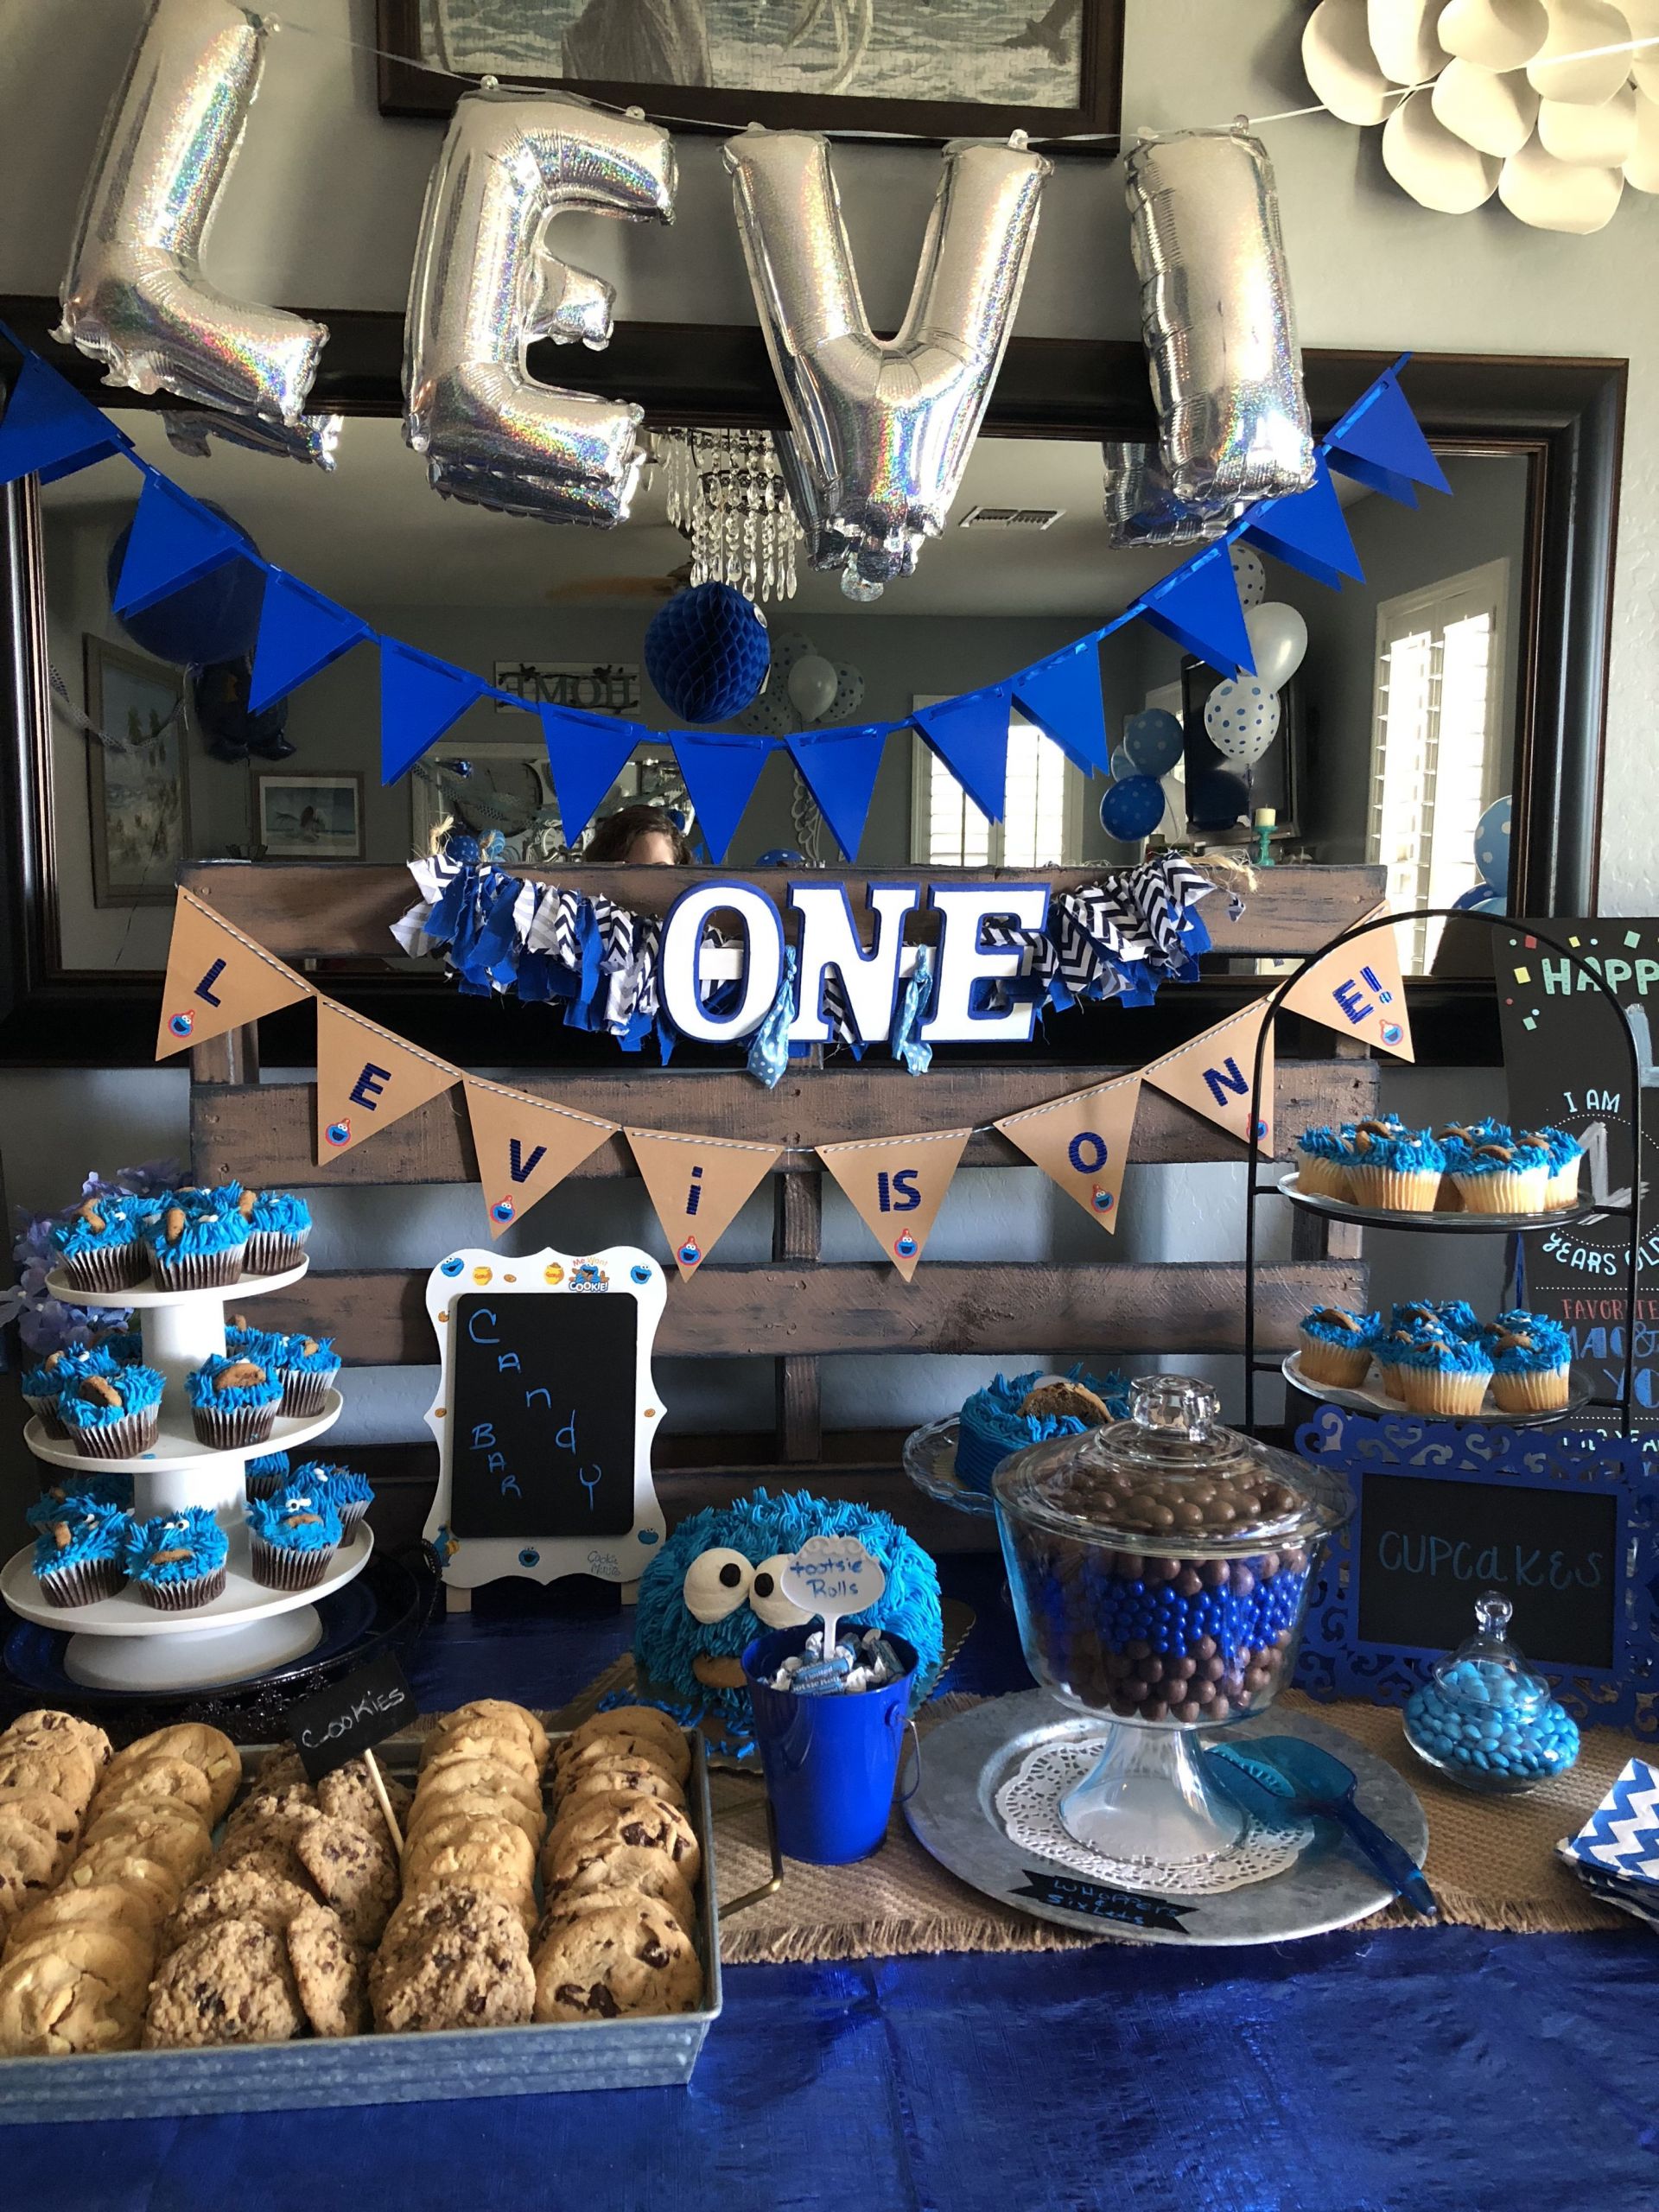 Cookie Monster Birthday Decorations
 Cookie Monster 1st bday decorations and candy bar